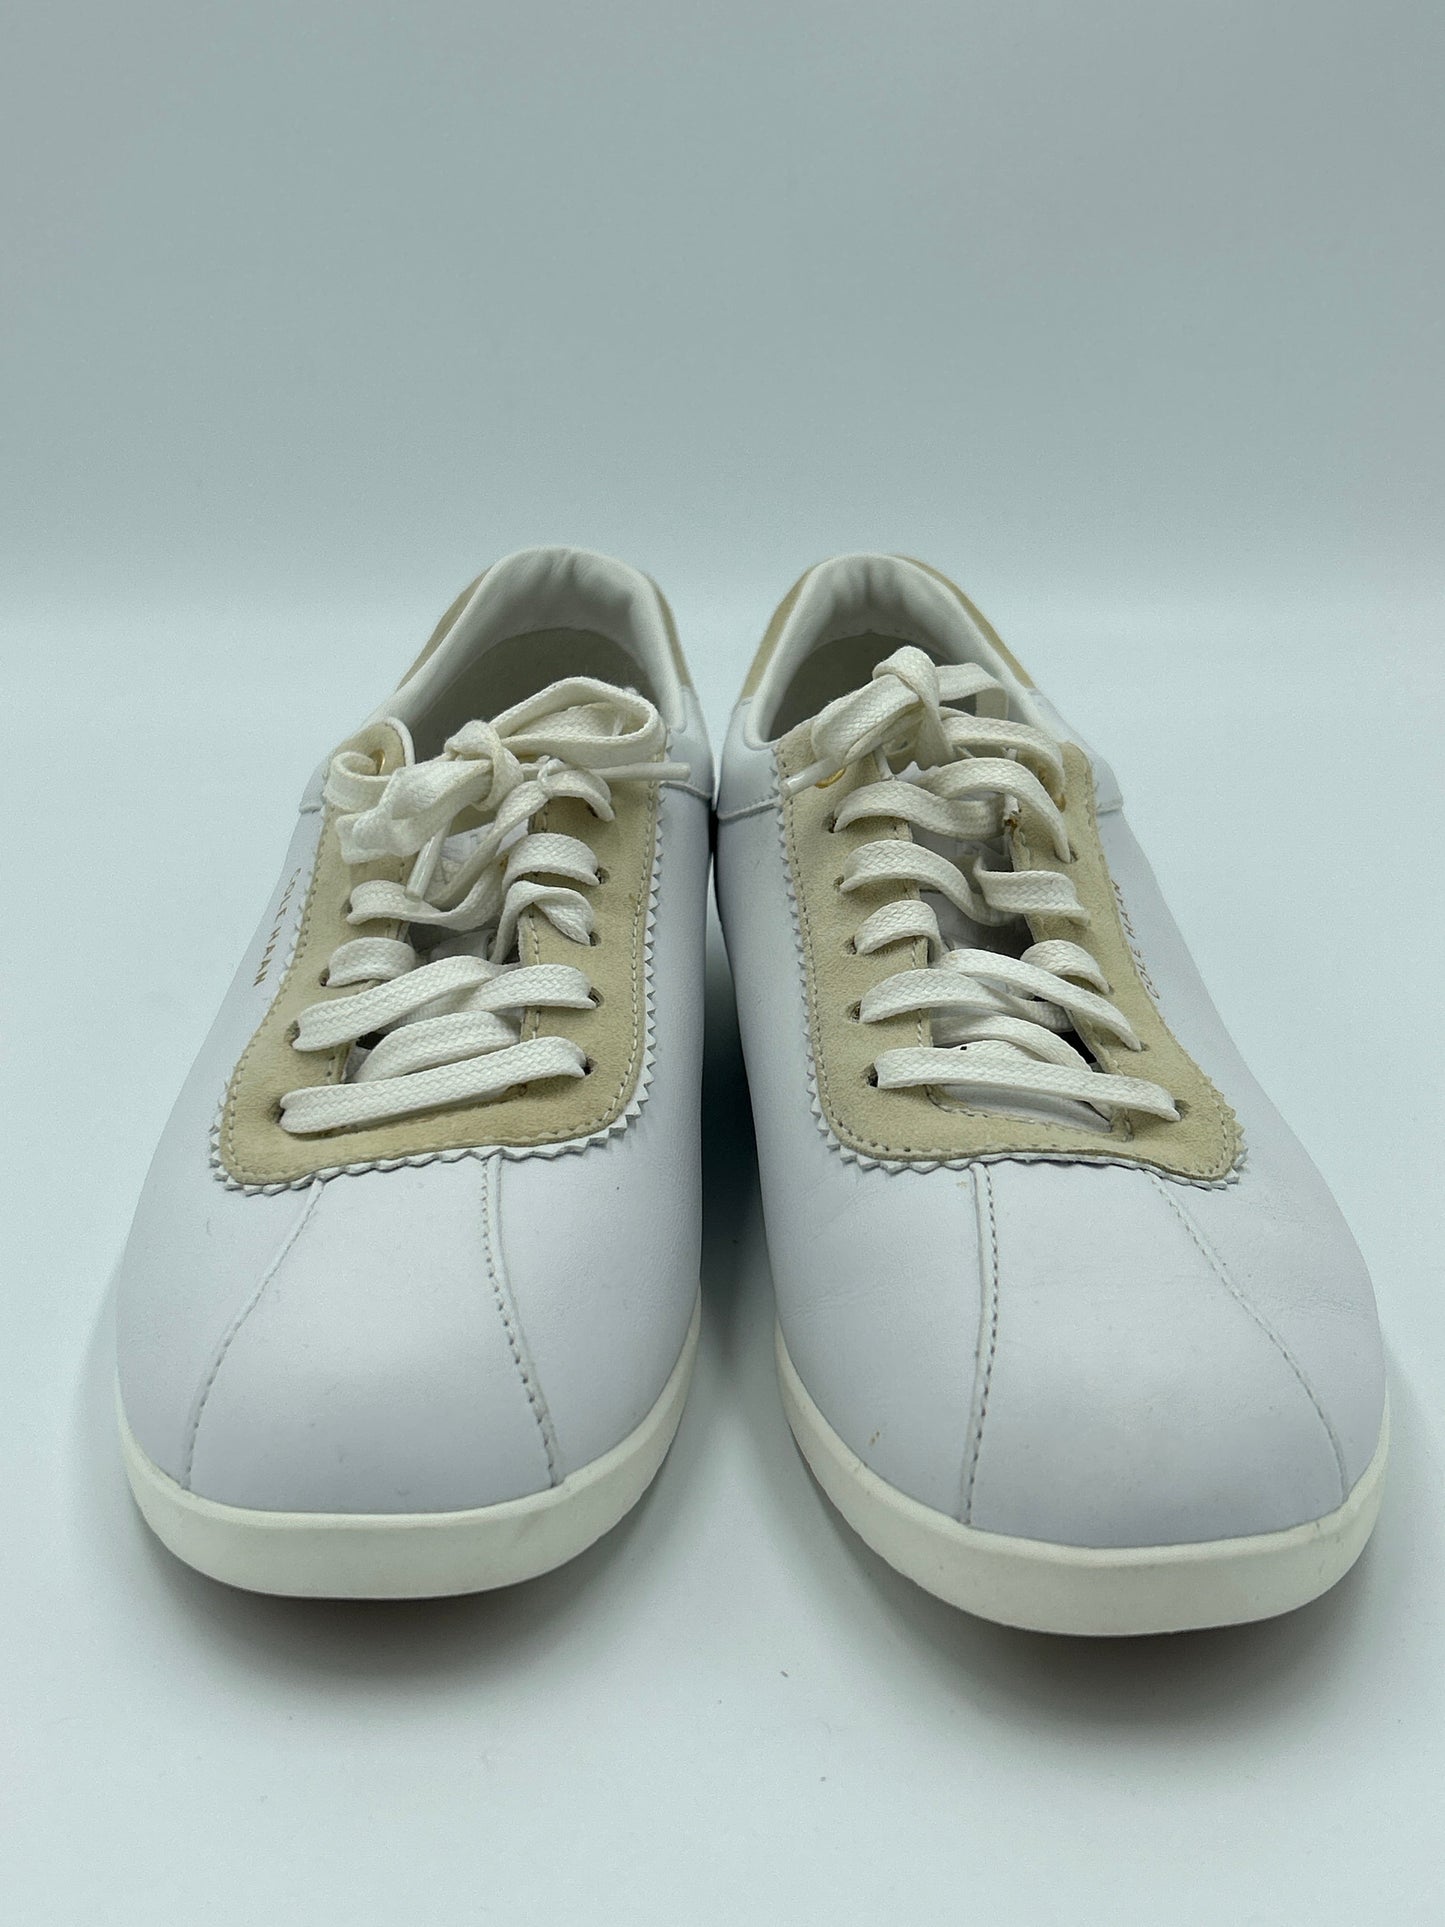 Shoes Designer By Cole-Haan  Size: 9